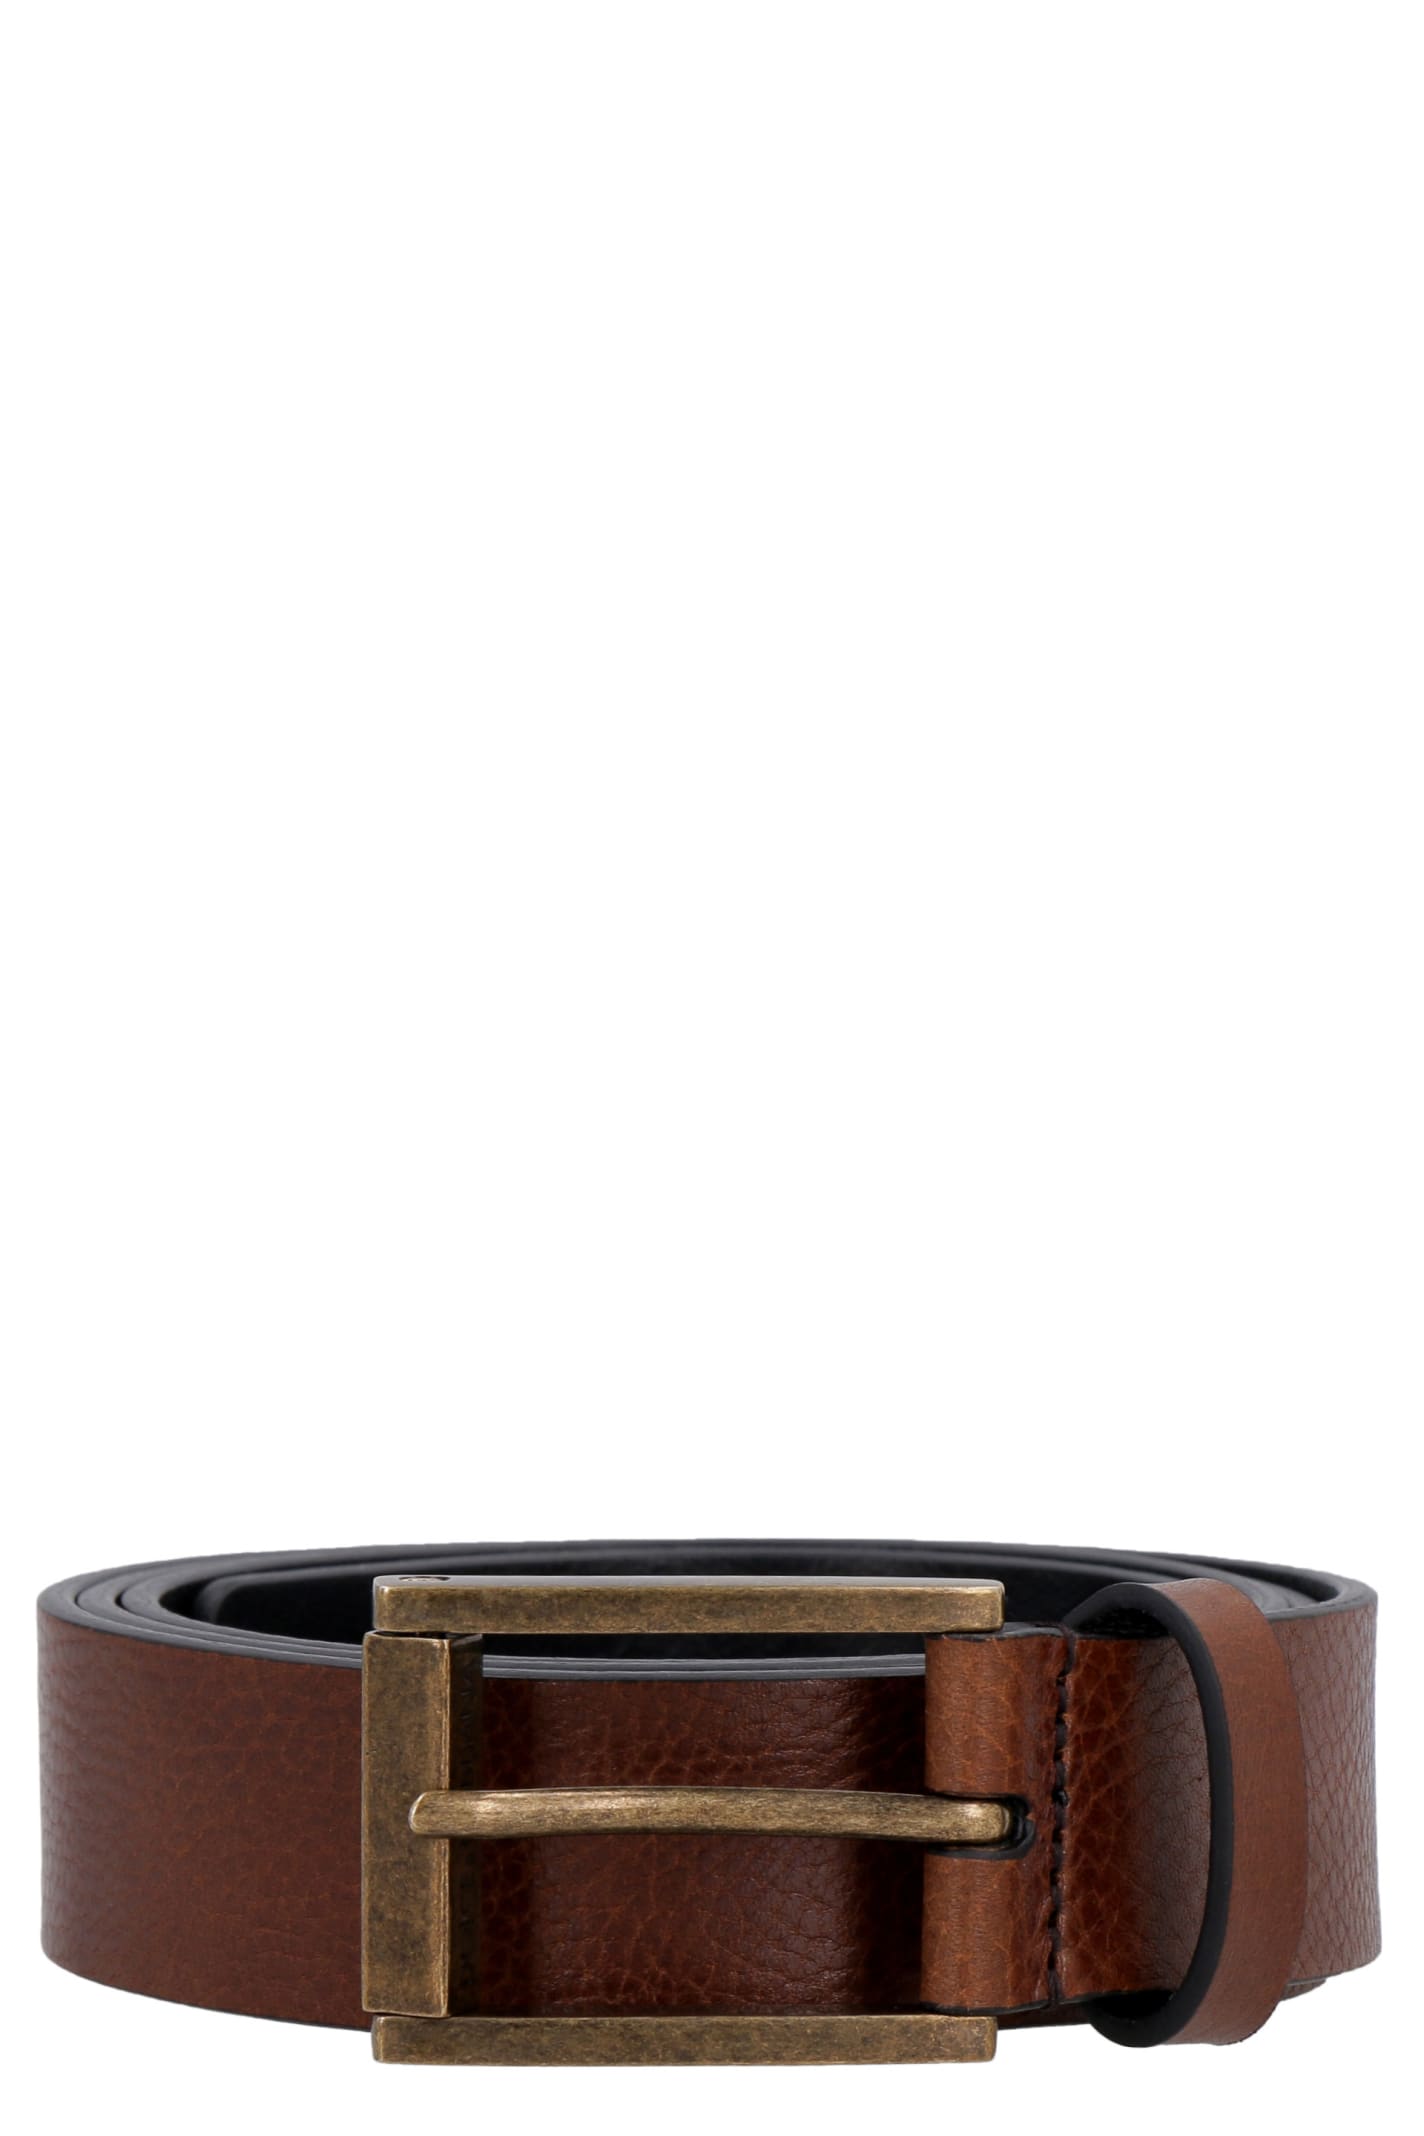 Dolce & Gabbana Leather Belt With Buckle